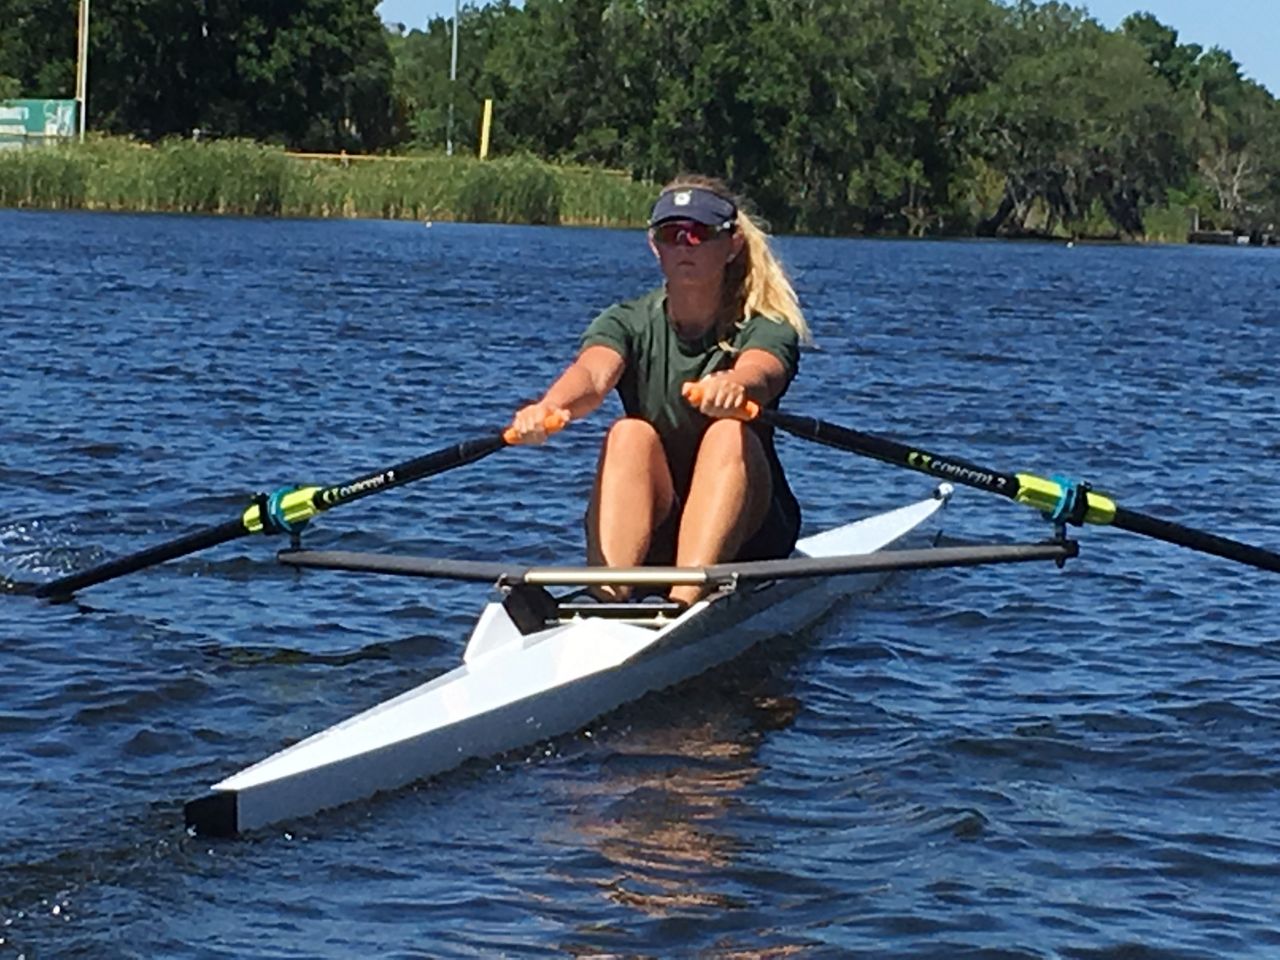 Tampa Catholic senior Isabel "Izzy" Hauber will be making her second straight appearance at nationals next month in just her second year competing in the sport (Photo Courtesy: Rishi Barran)